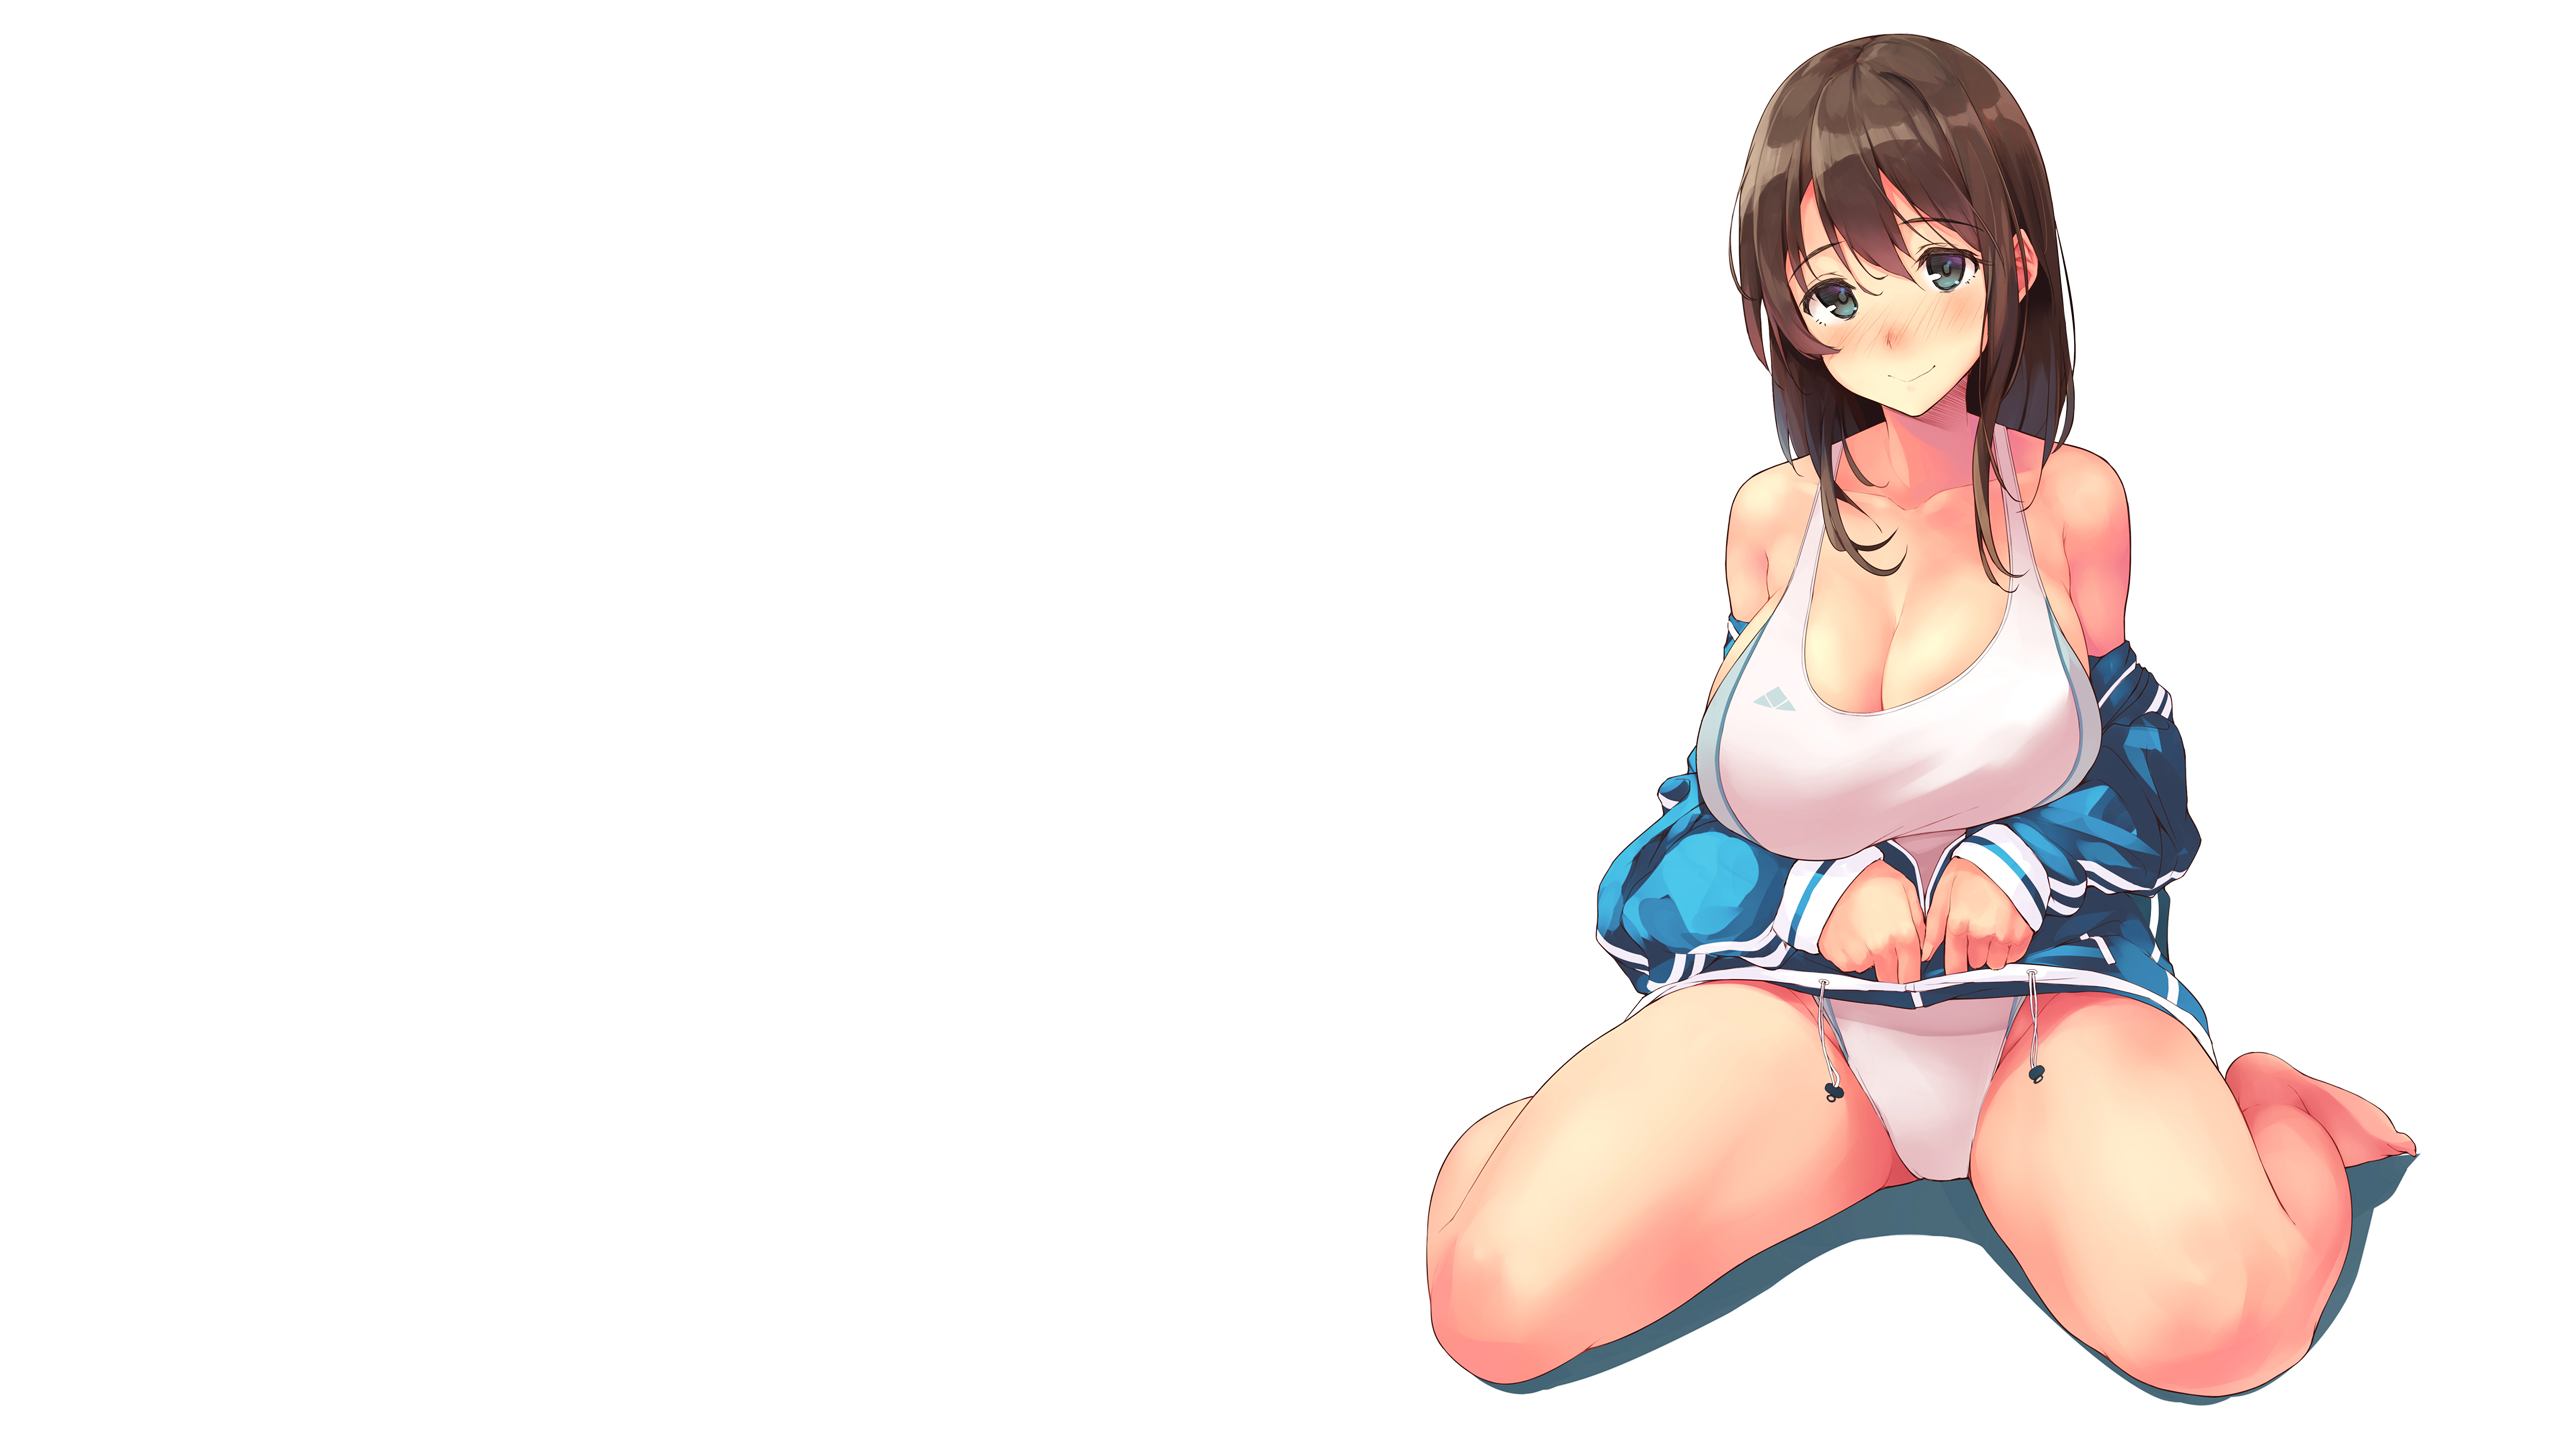 Anime 2560x1440 anime anime girls ecchi sitting big boobs boobs swimwear one-piece swimsuit spread legs white swimsuit thighs thigh-highs kekemotsu open clothes cleavage